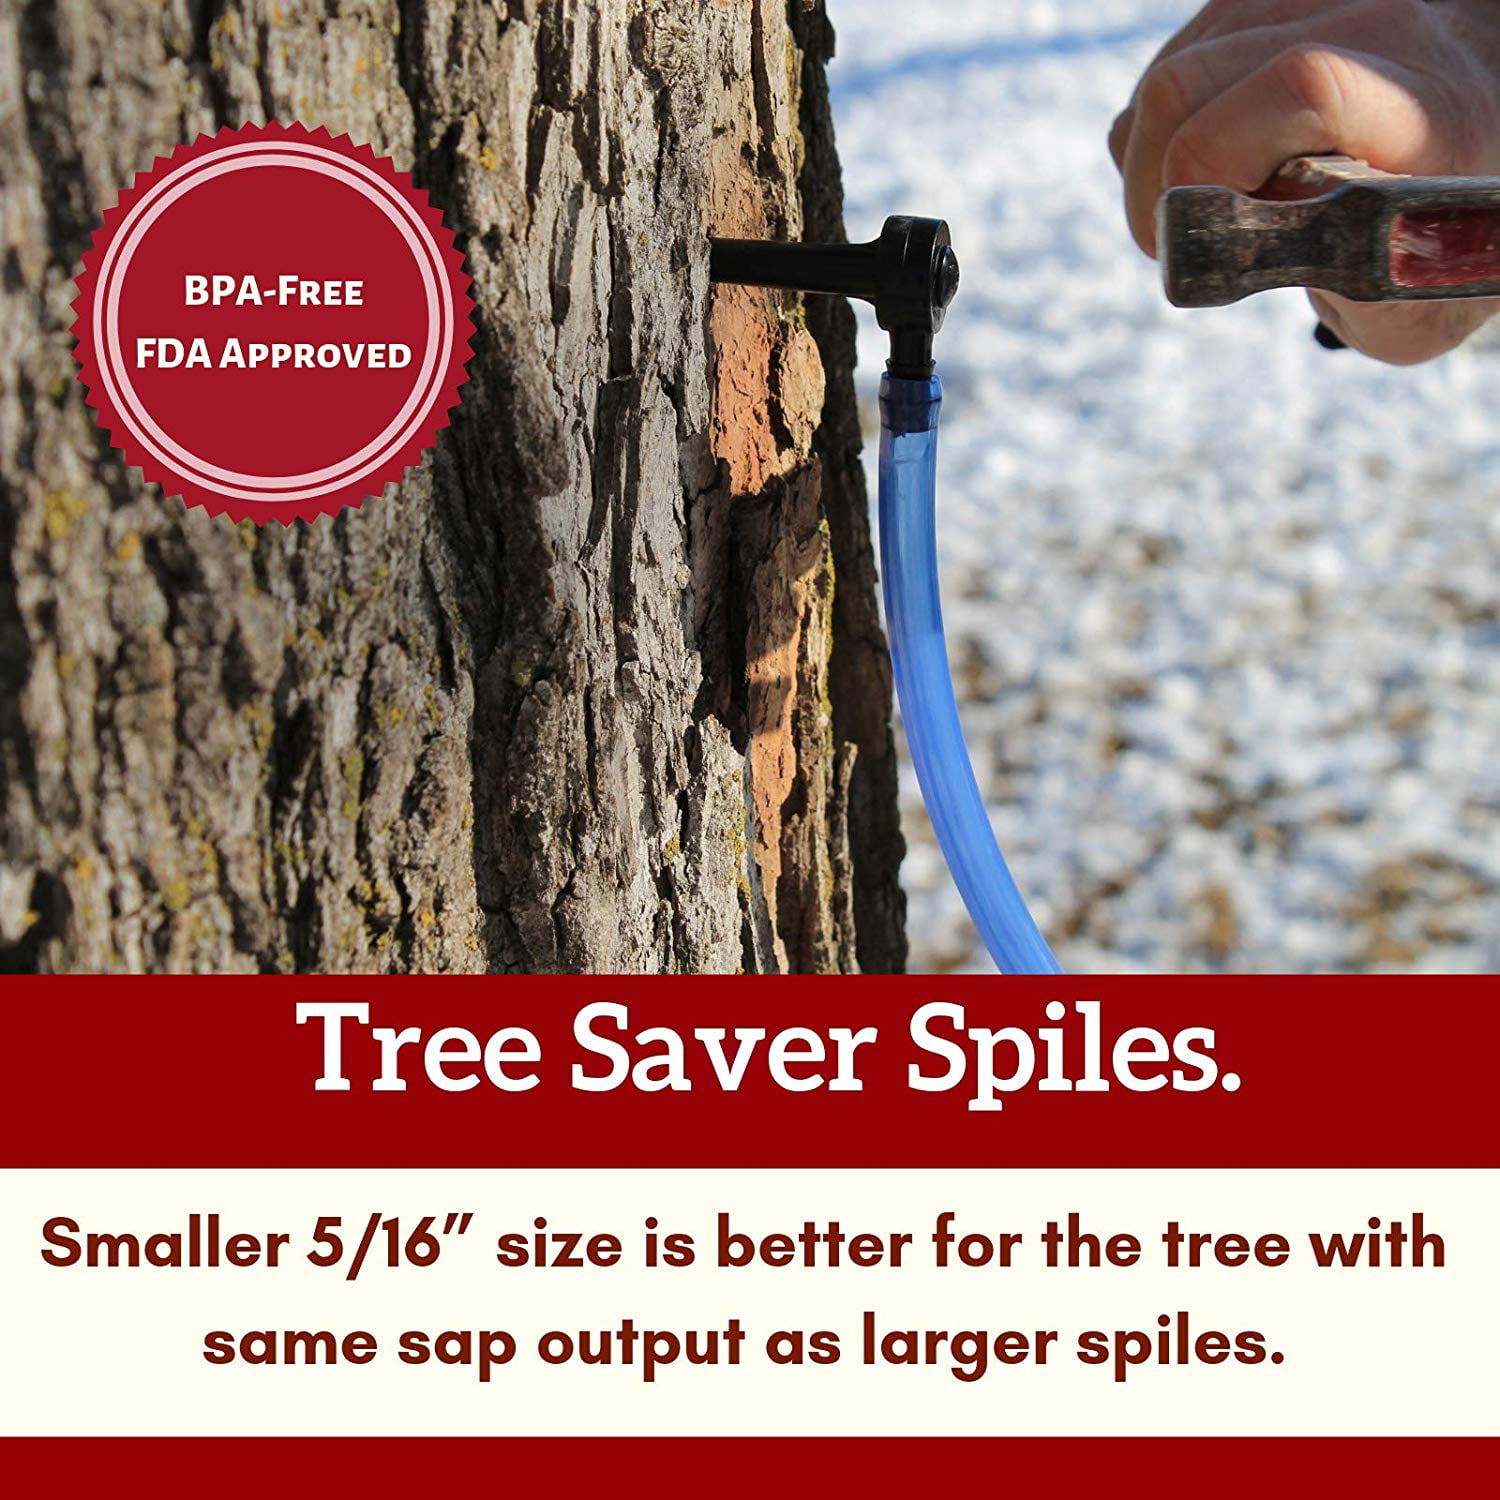 20 New Sugar Maple Taps spouts 5/16" for syrup sap Tree Saver Size. 